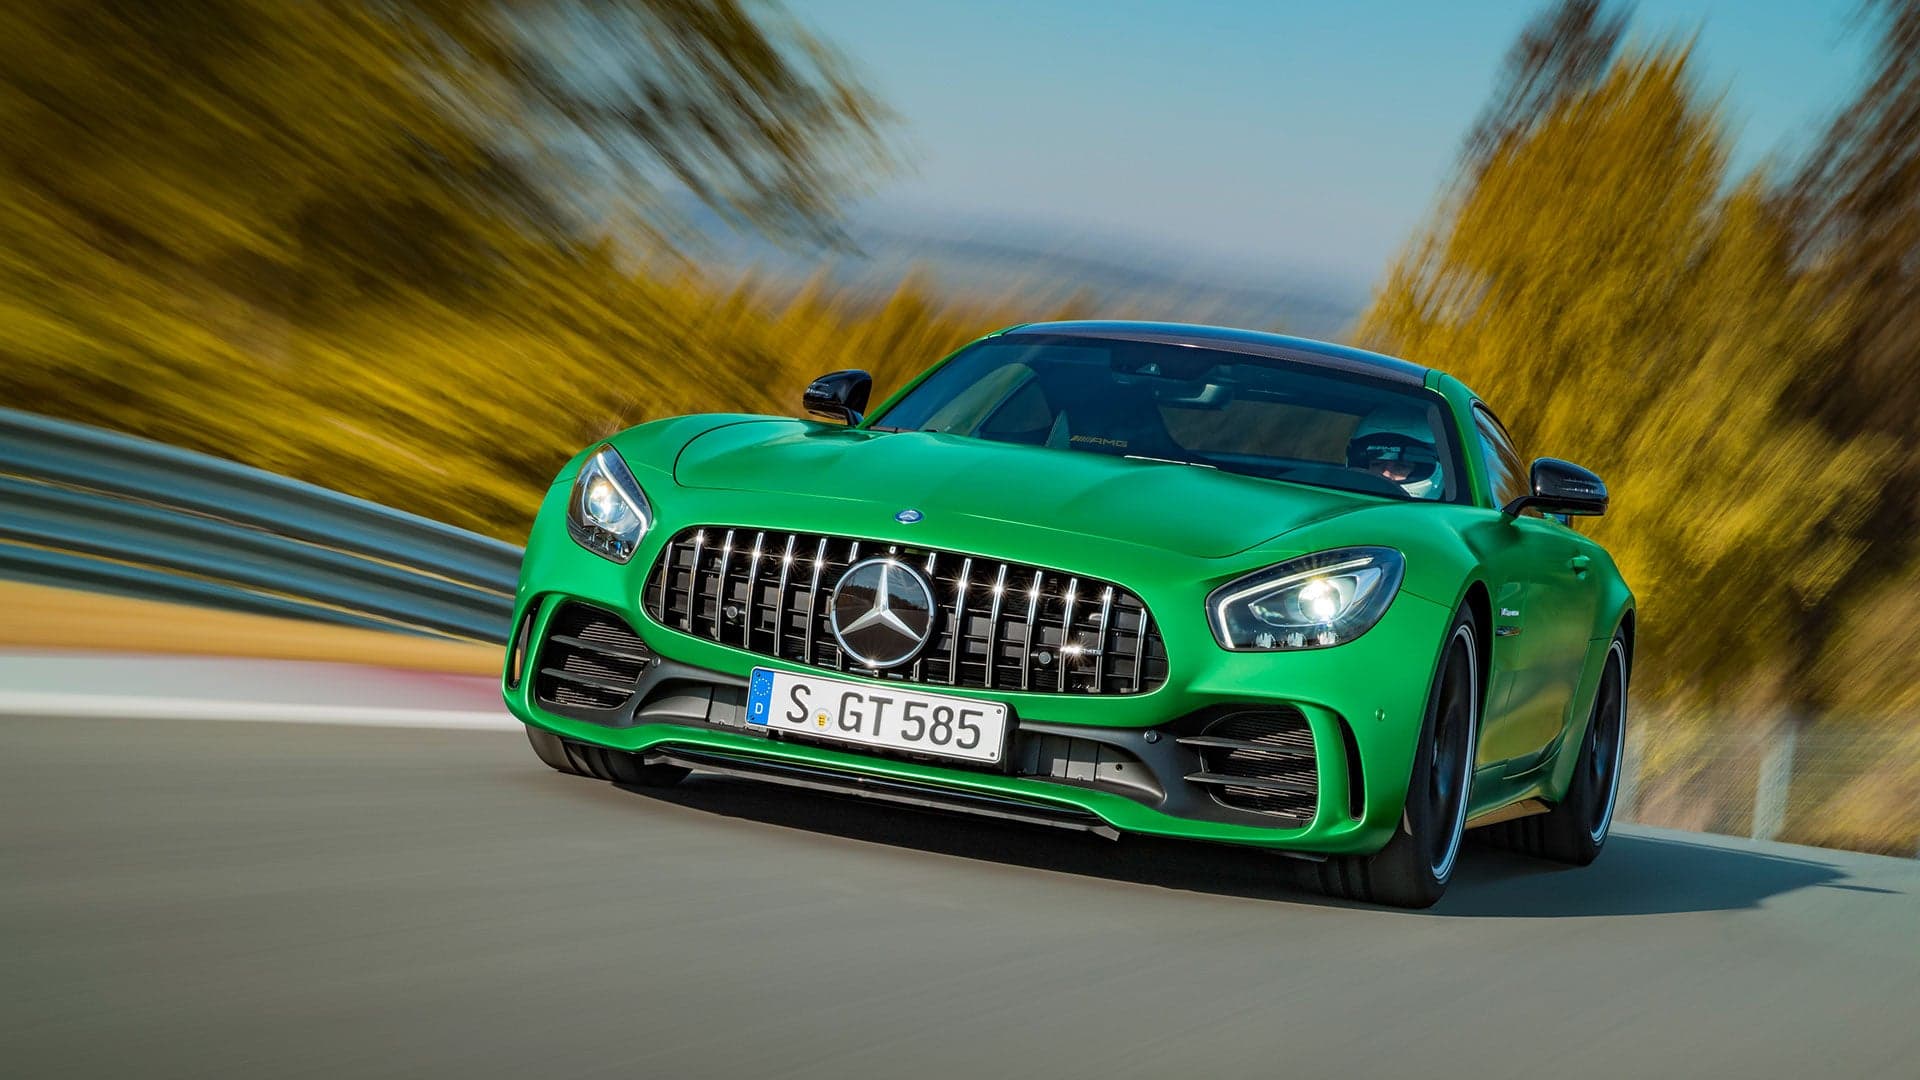 Your First Look at the New Mercedes-AMG GT R